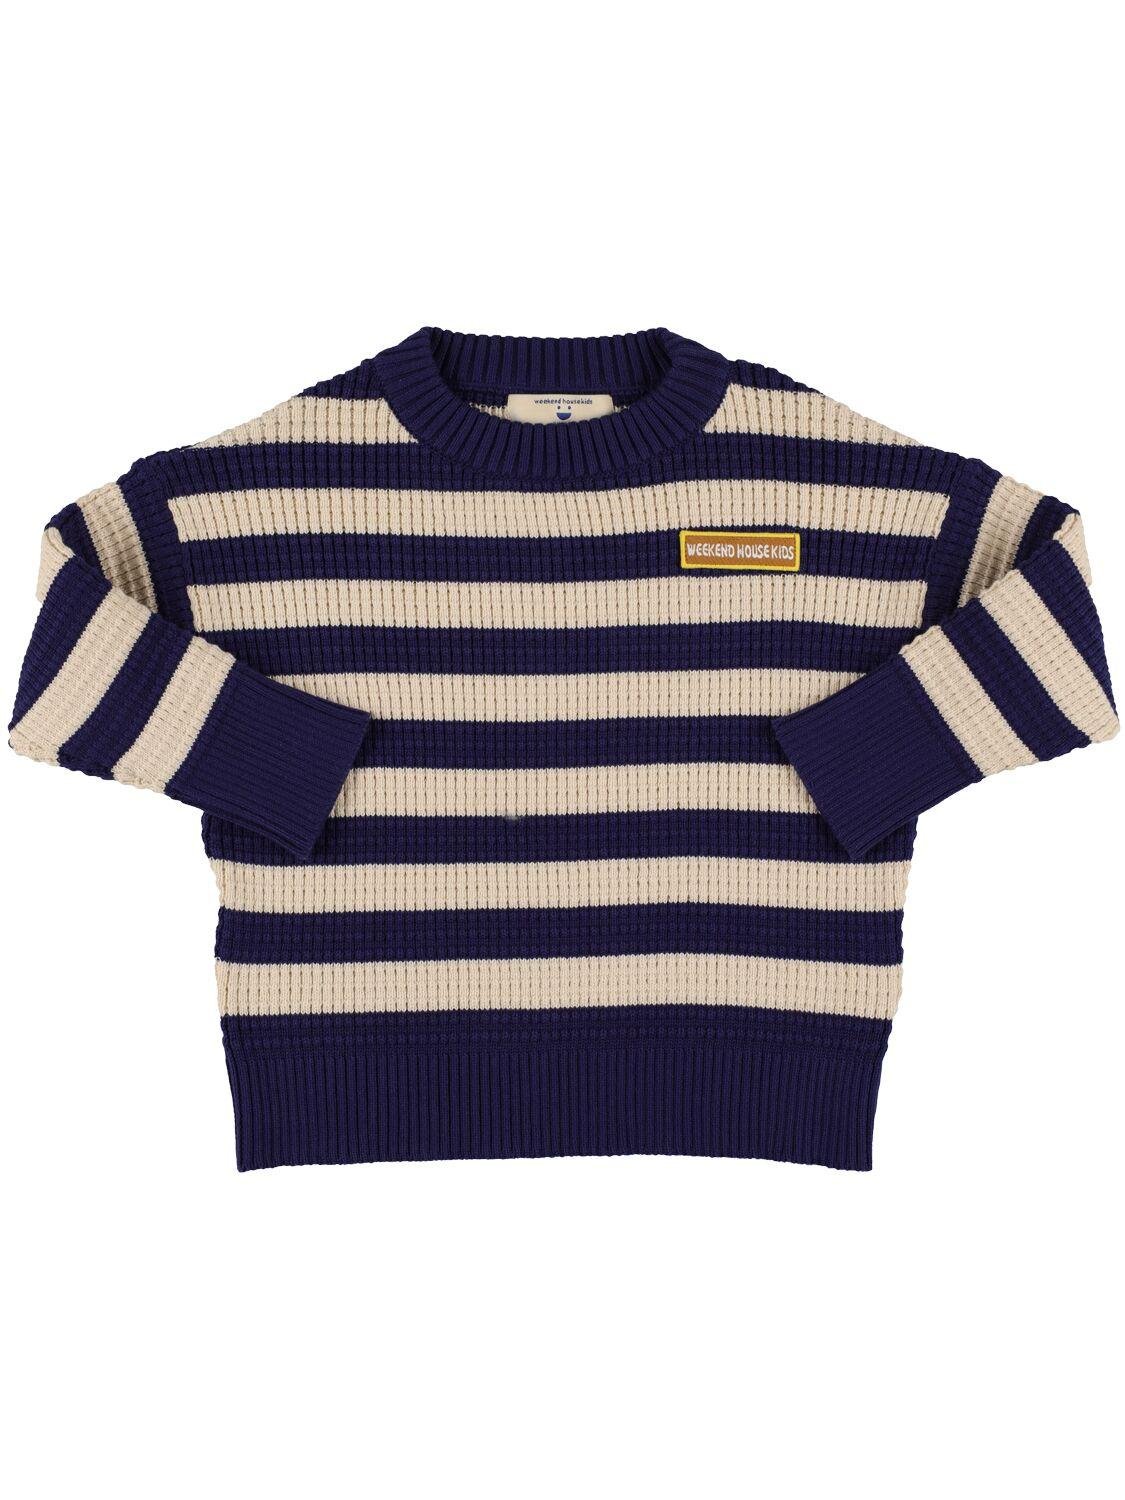 Striped Cotton Knit Sweater by WEEKEND HOUSE KIDS